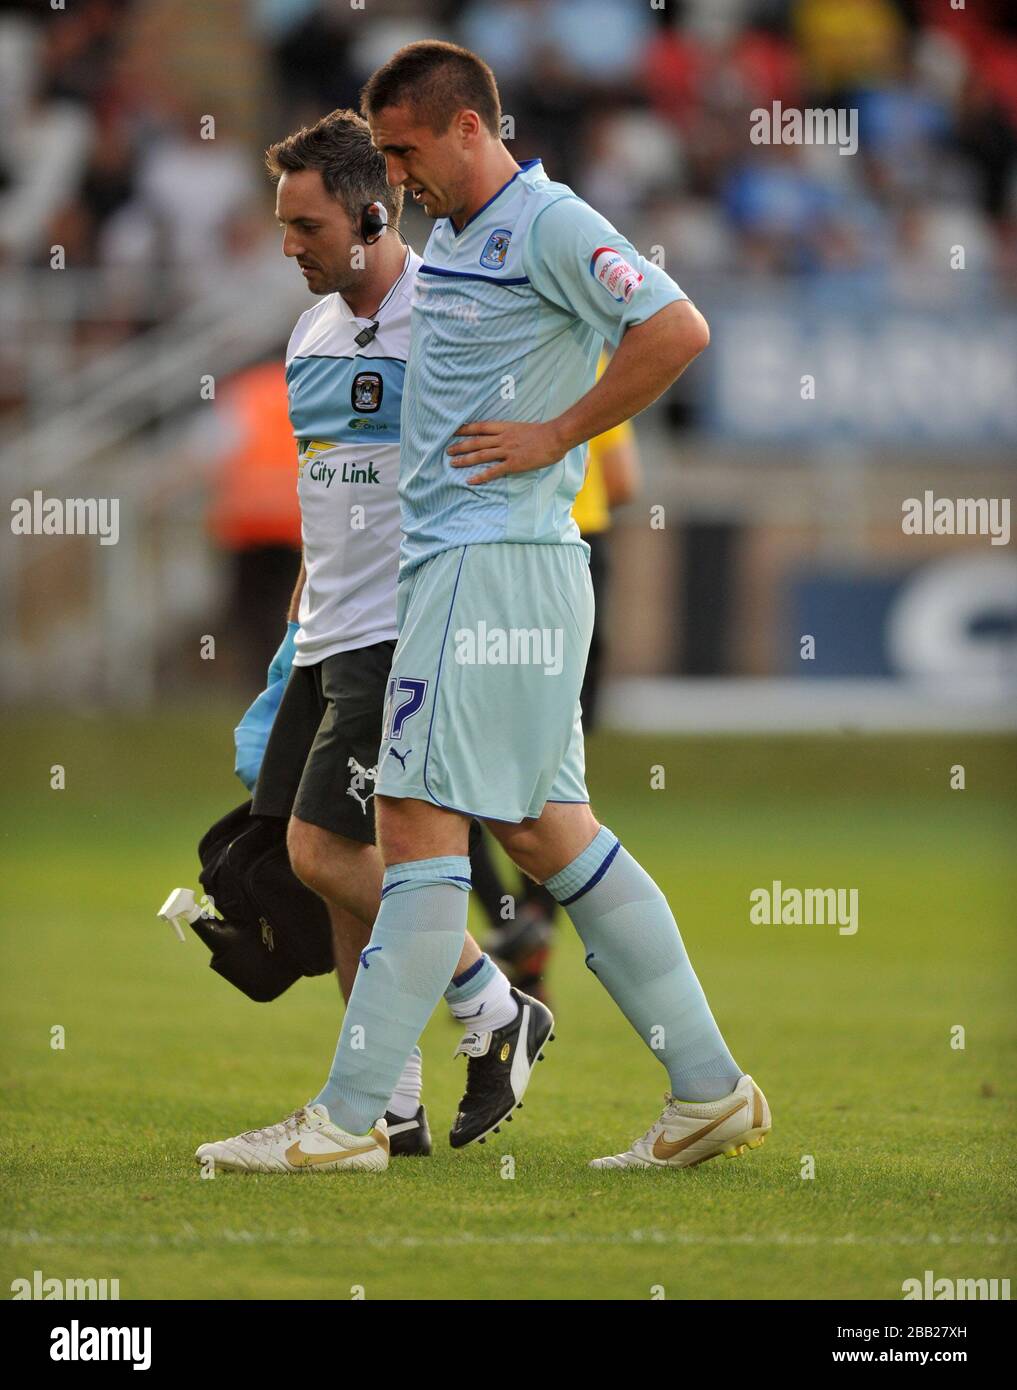 Coventry City's Callum Ball takes an early knock Stock Photo - Alamy